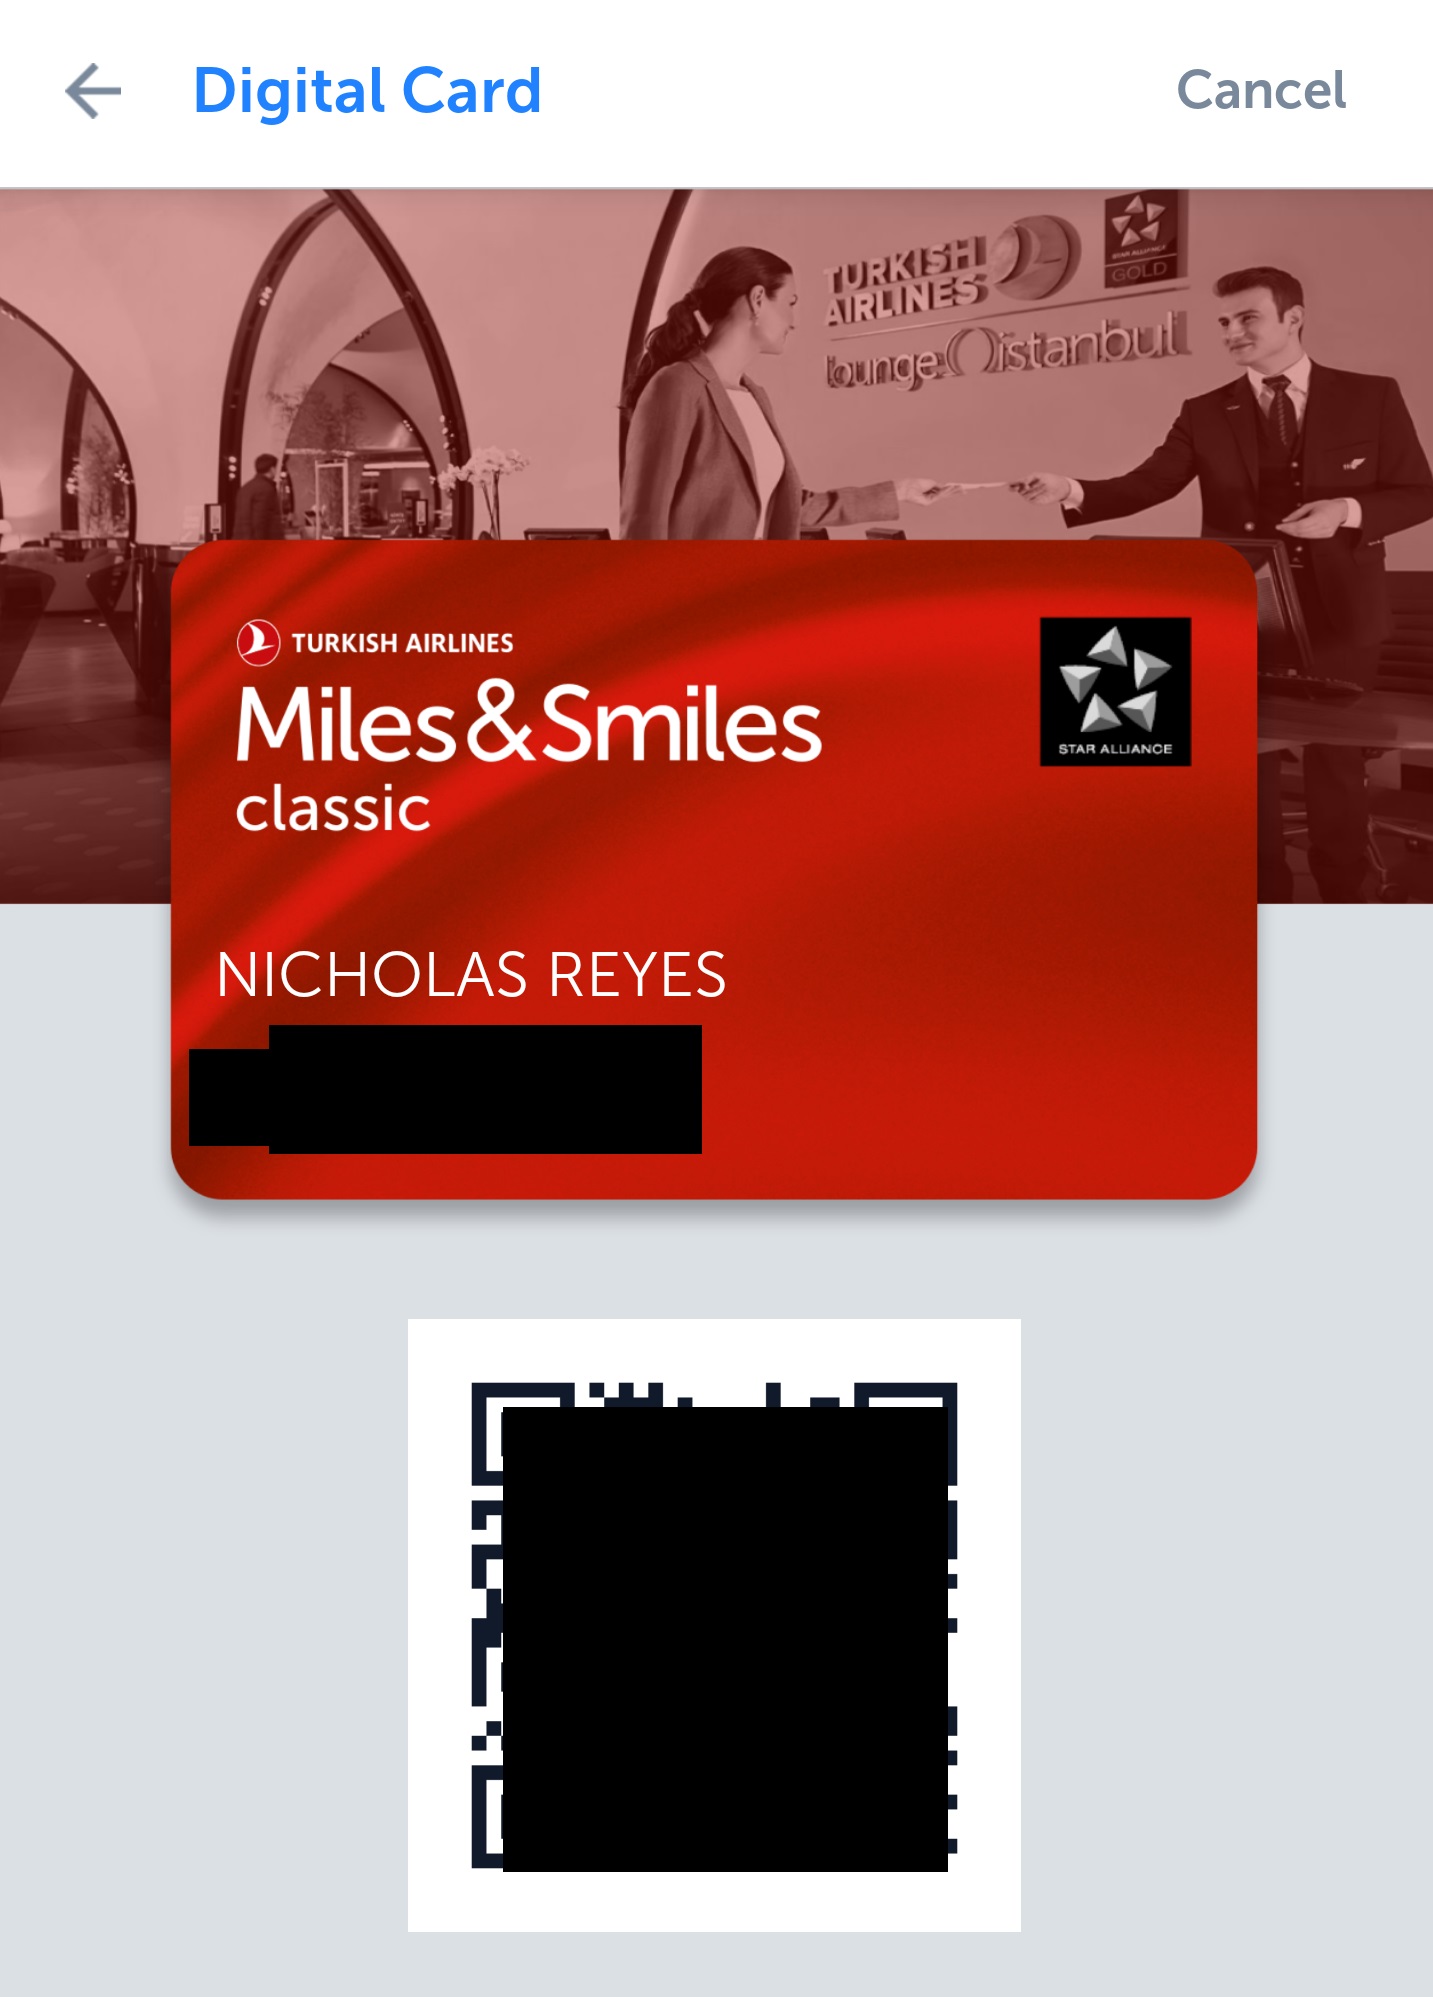 Miles and when. Miles and smiles Turkish Airlines. Карта Miles and smiles. Кредитная карта Miles and smiles Turkish. Зал ожидания Turkish Airlines Miles&smiles.